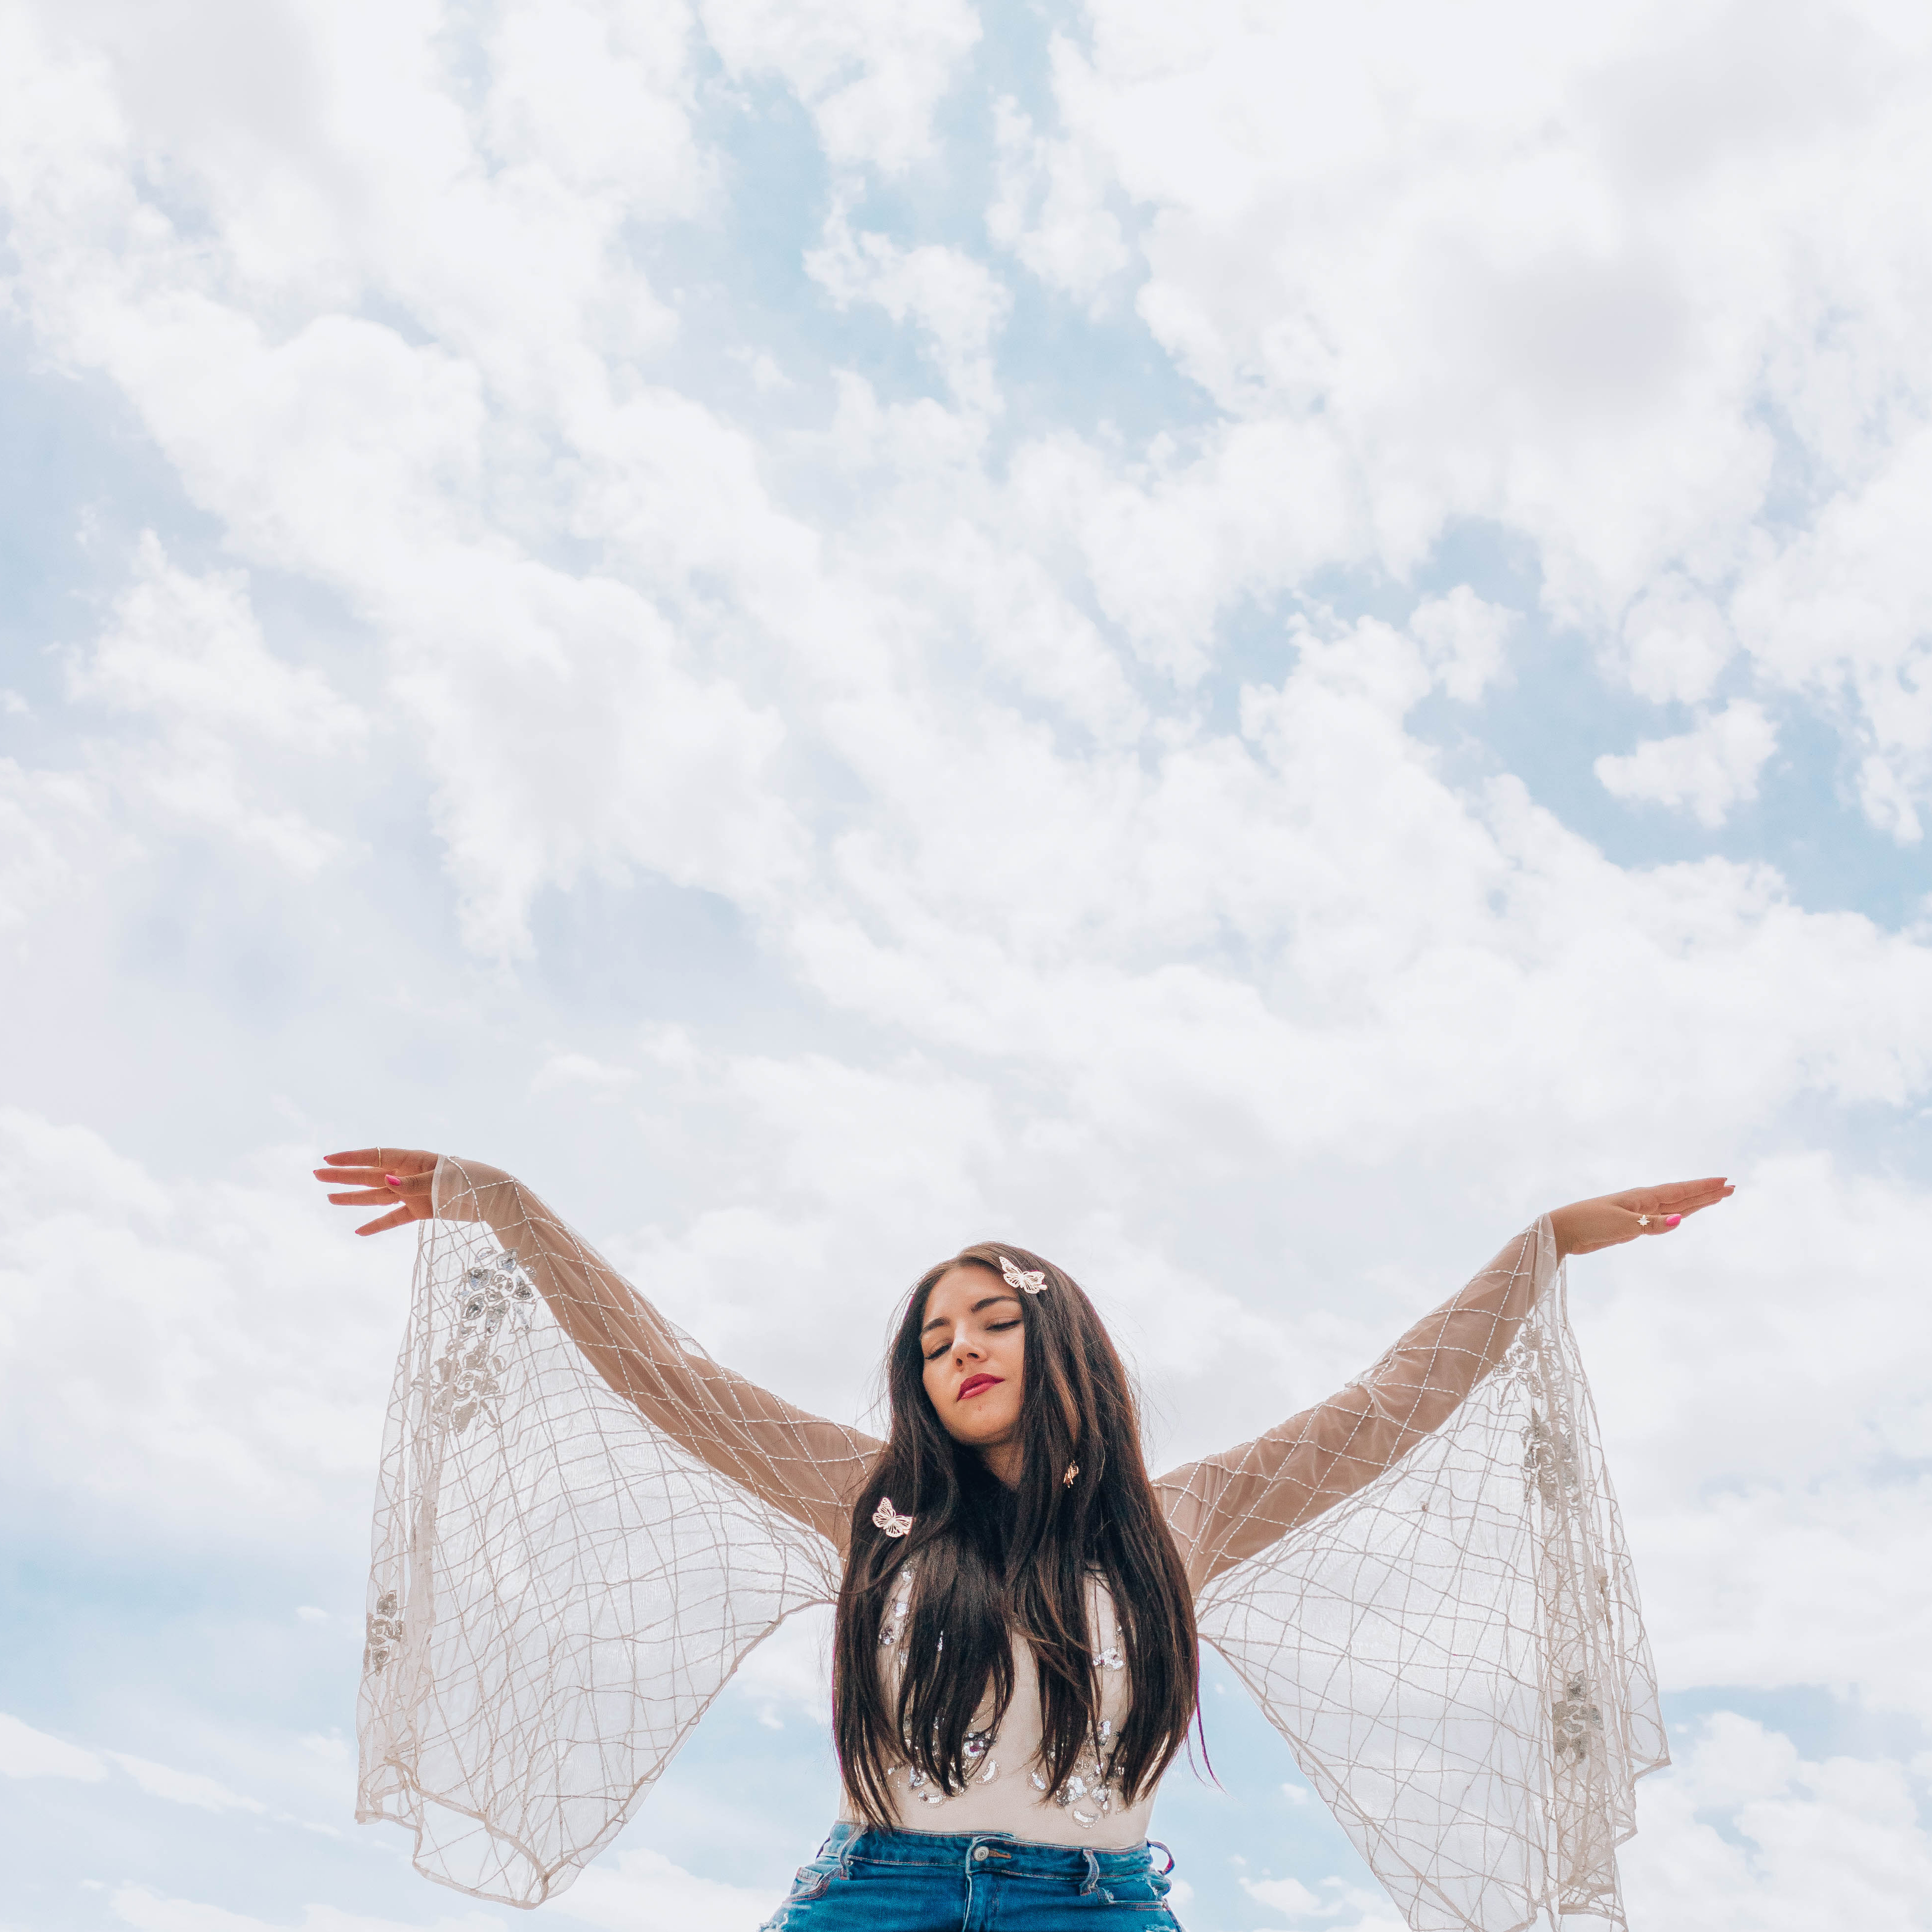 Lauryn from Lauryncakes has her arms spread high in the air like wings while a blue sky with clouds sits behind her. In this post, you will find Vitamin C products that will brighten your skin.